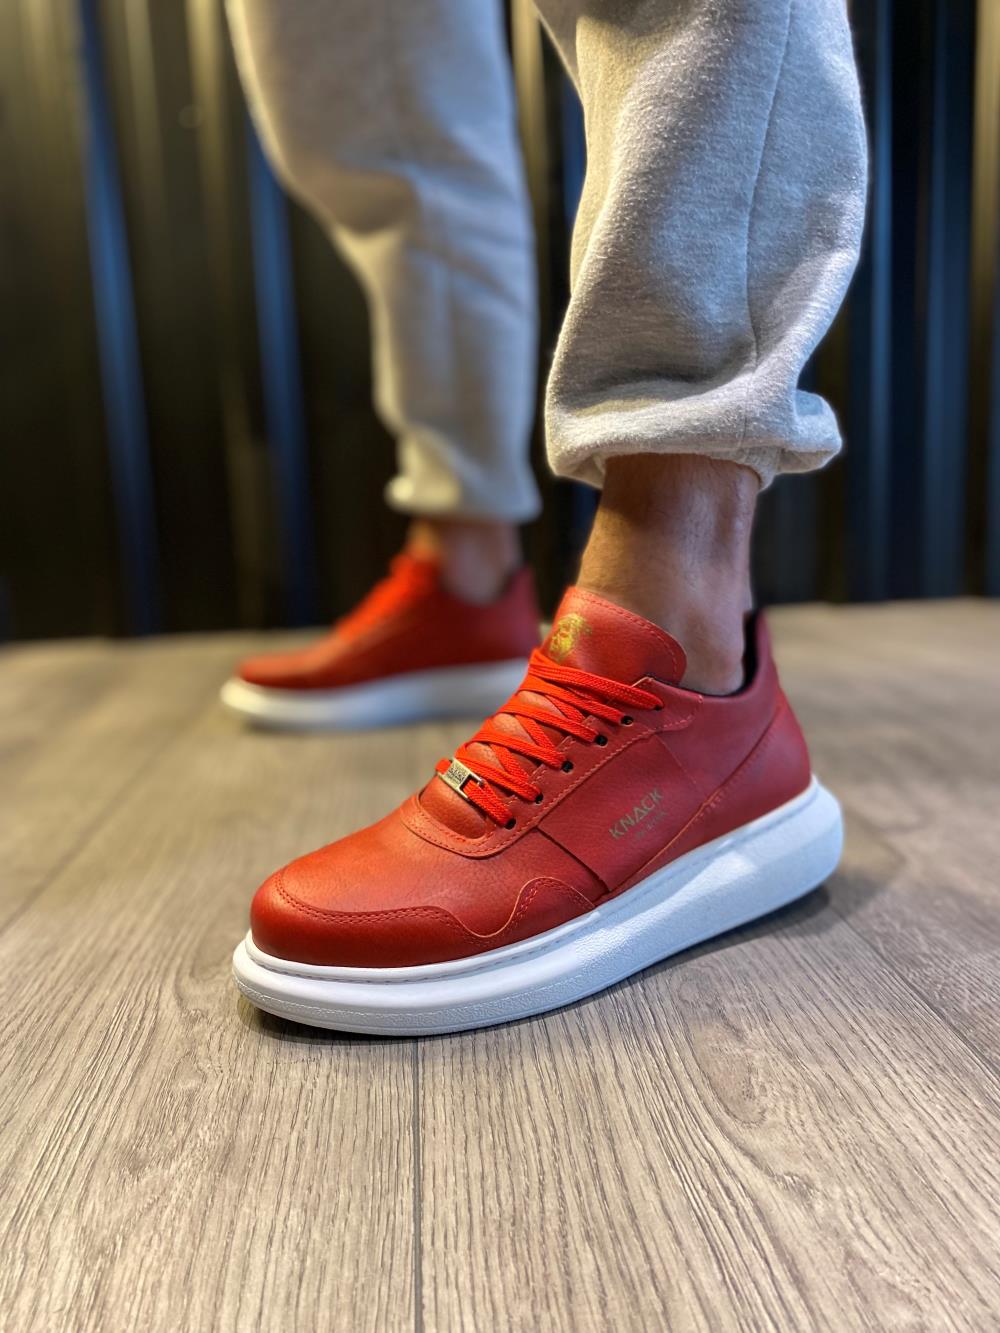 Men's High Sole Casual Sneakers Shoes 040 Red - STREETMODE ™